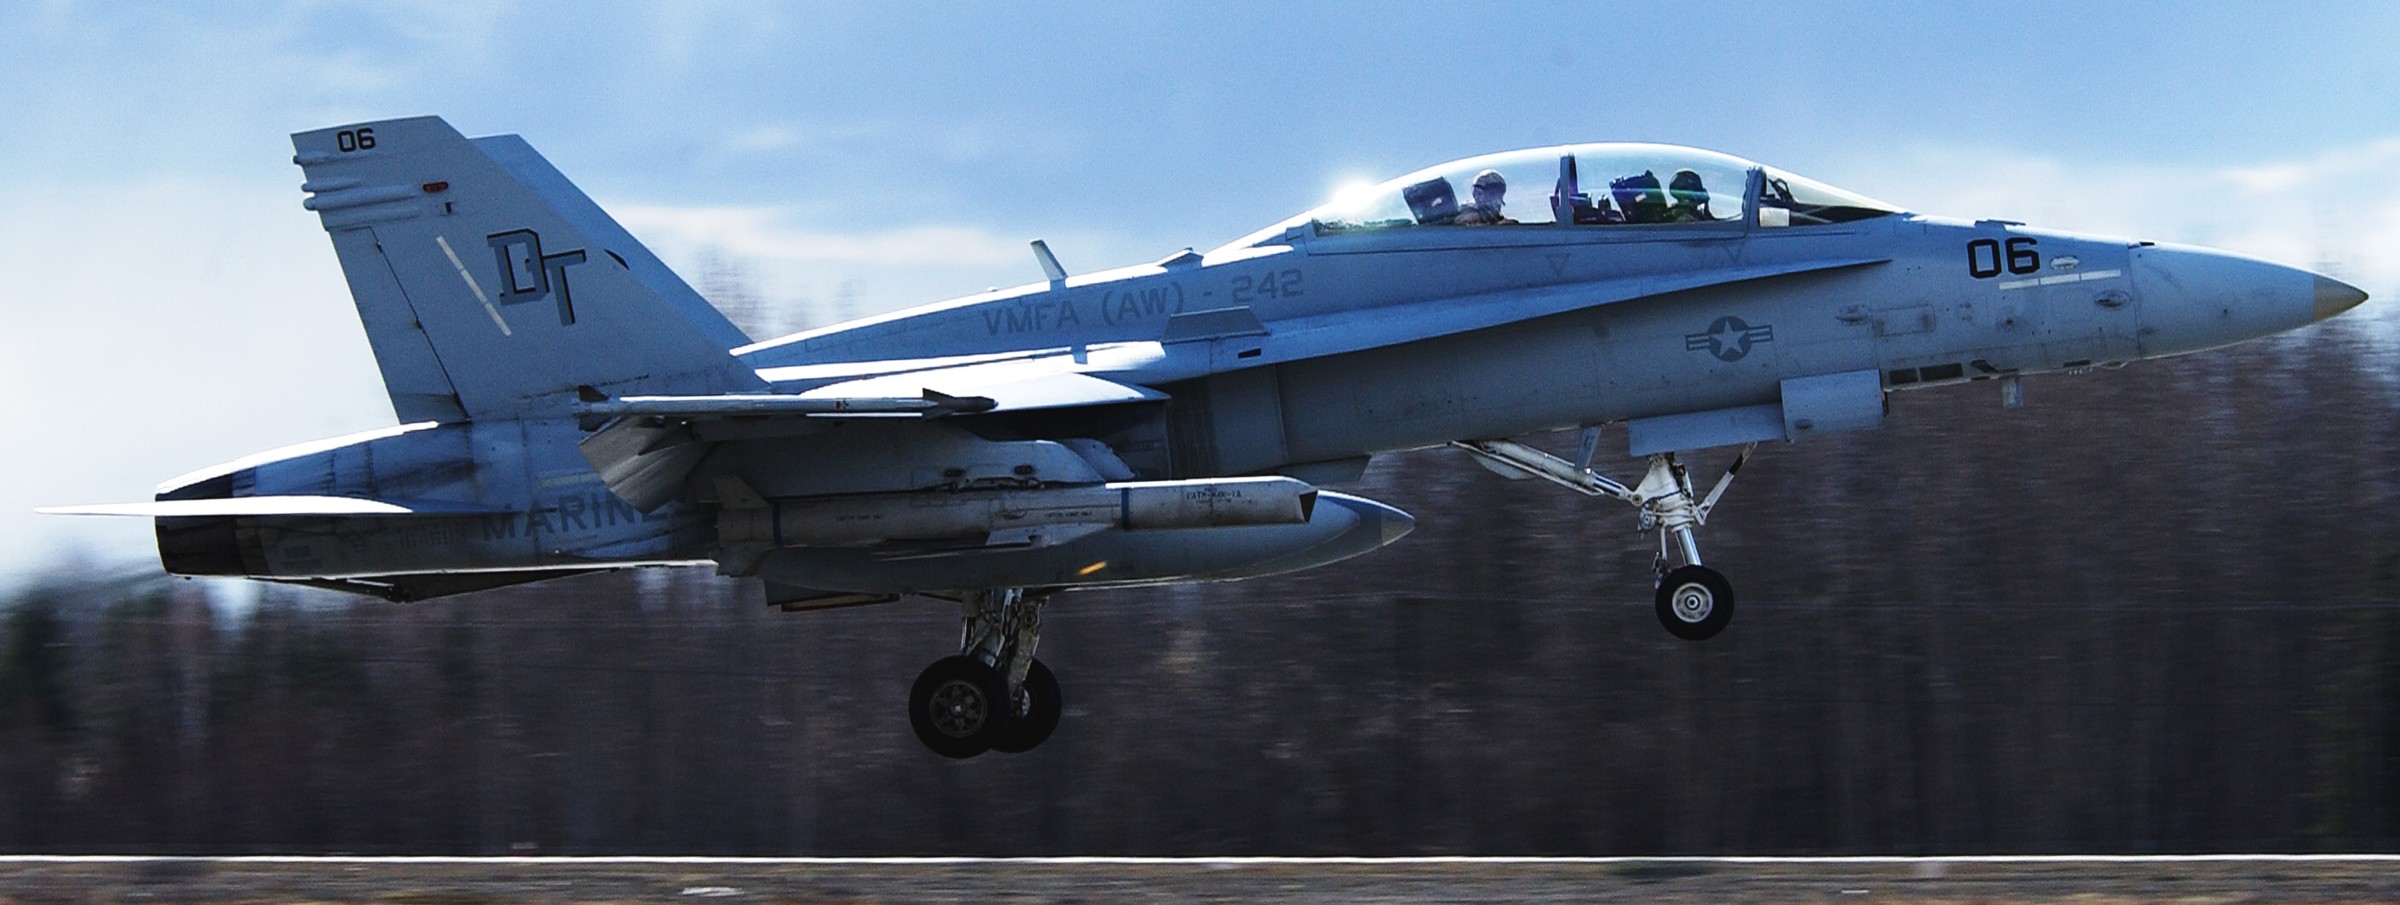 vmfa(aw)-242 bats marine all-weather fighter attack squadron usmc f/a-18d hornet 30 agm-84k slam-er missile